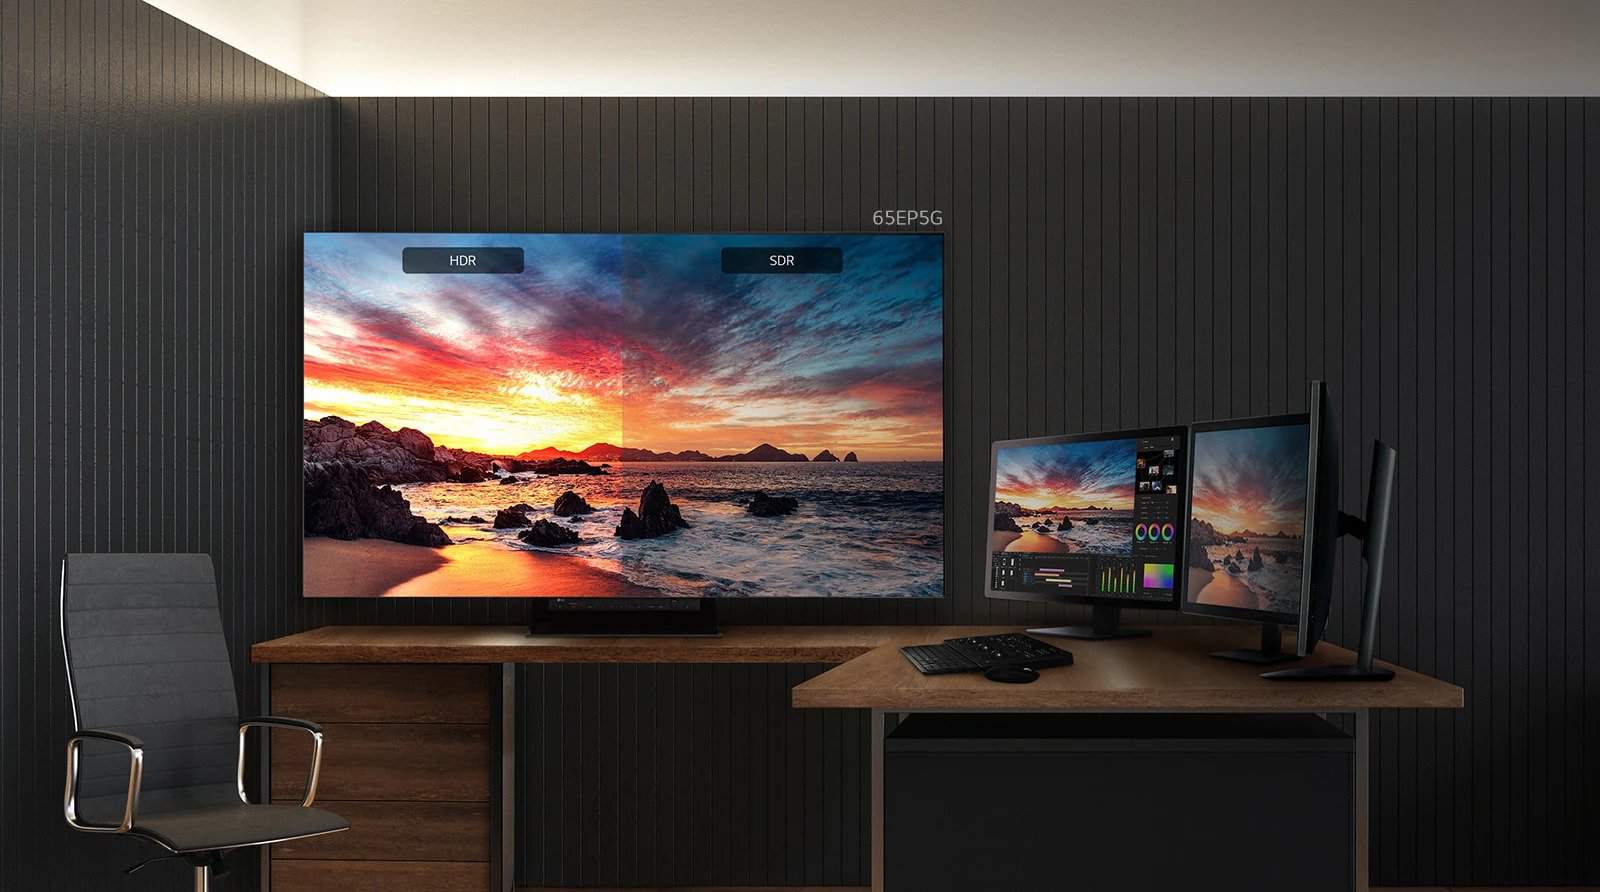 The all-new versatile LG OLED Pro Monitor allows users to prioritise content production